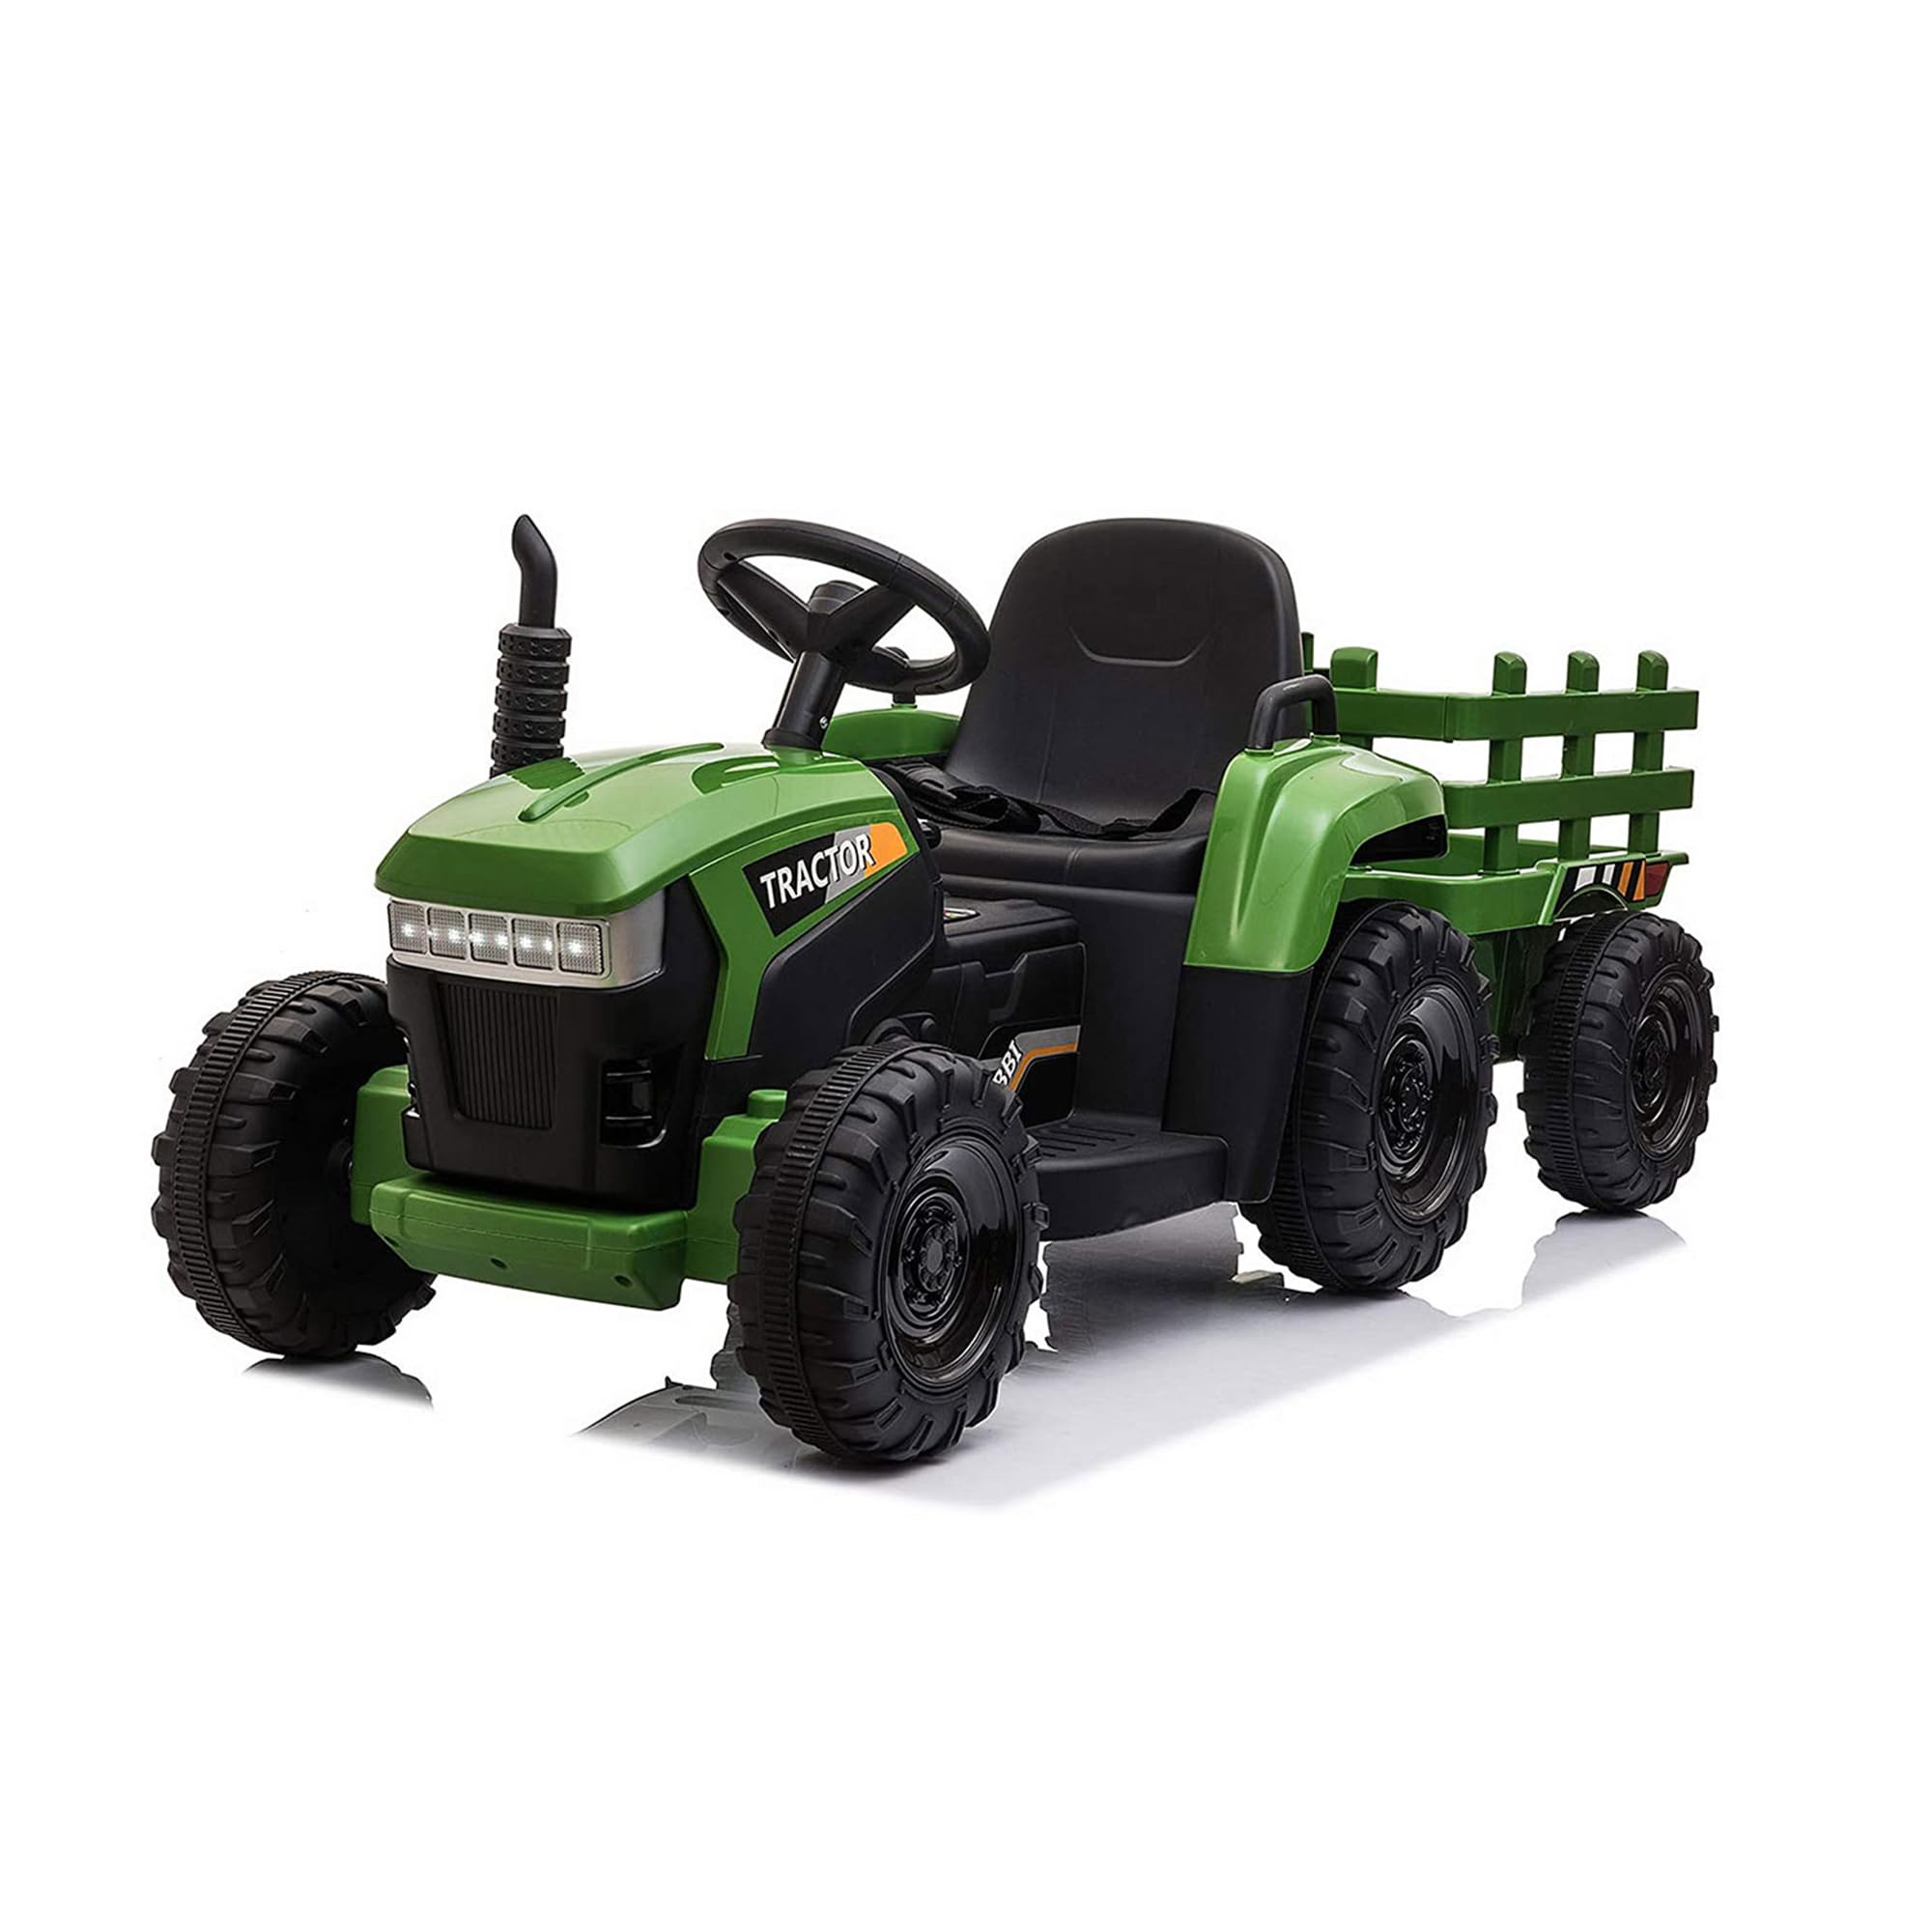 TOBBI 12v Battery-Powered Toy Tractor